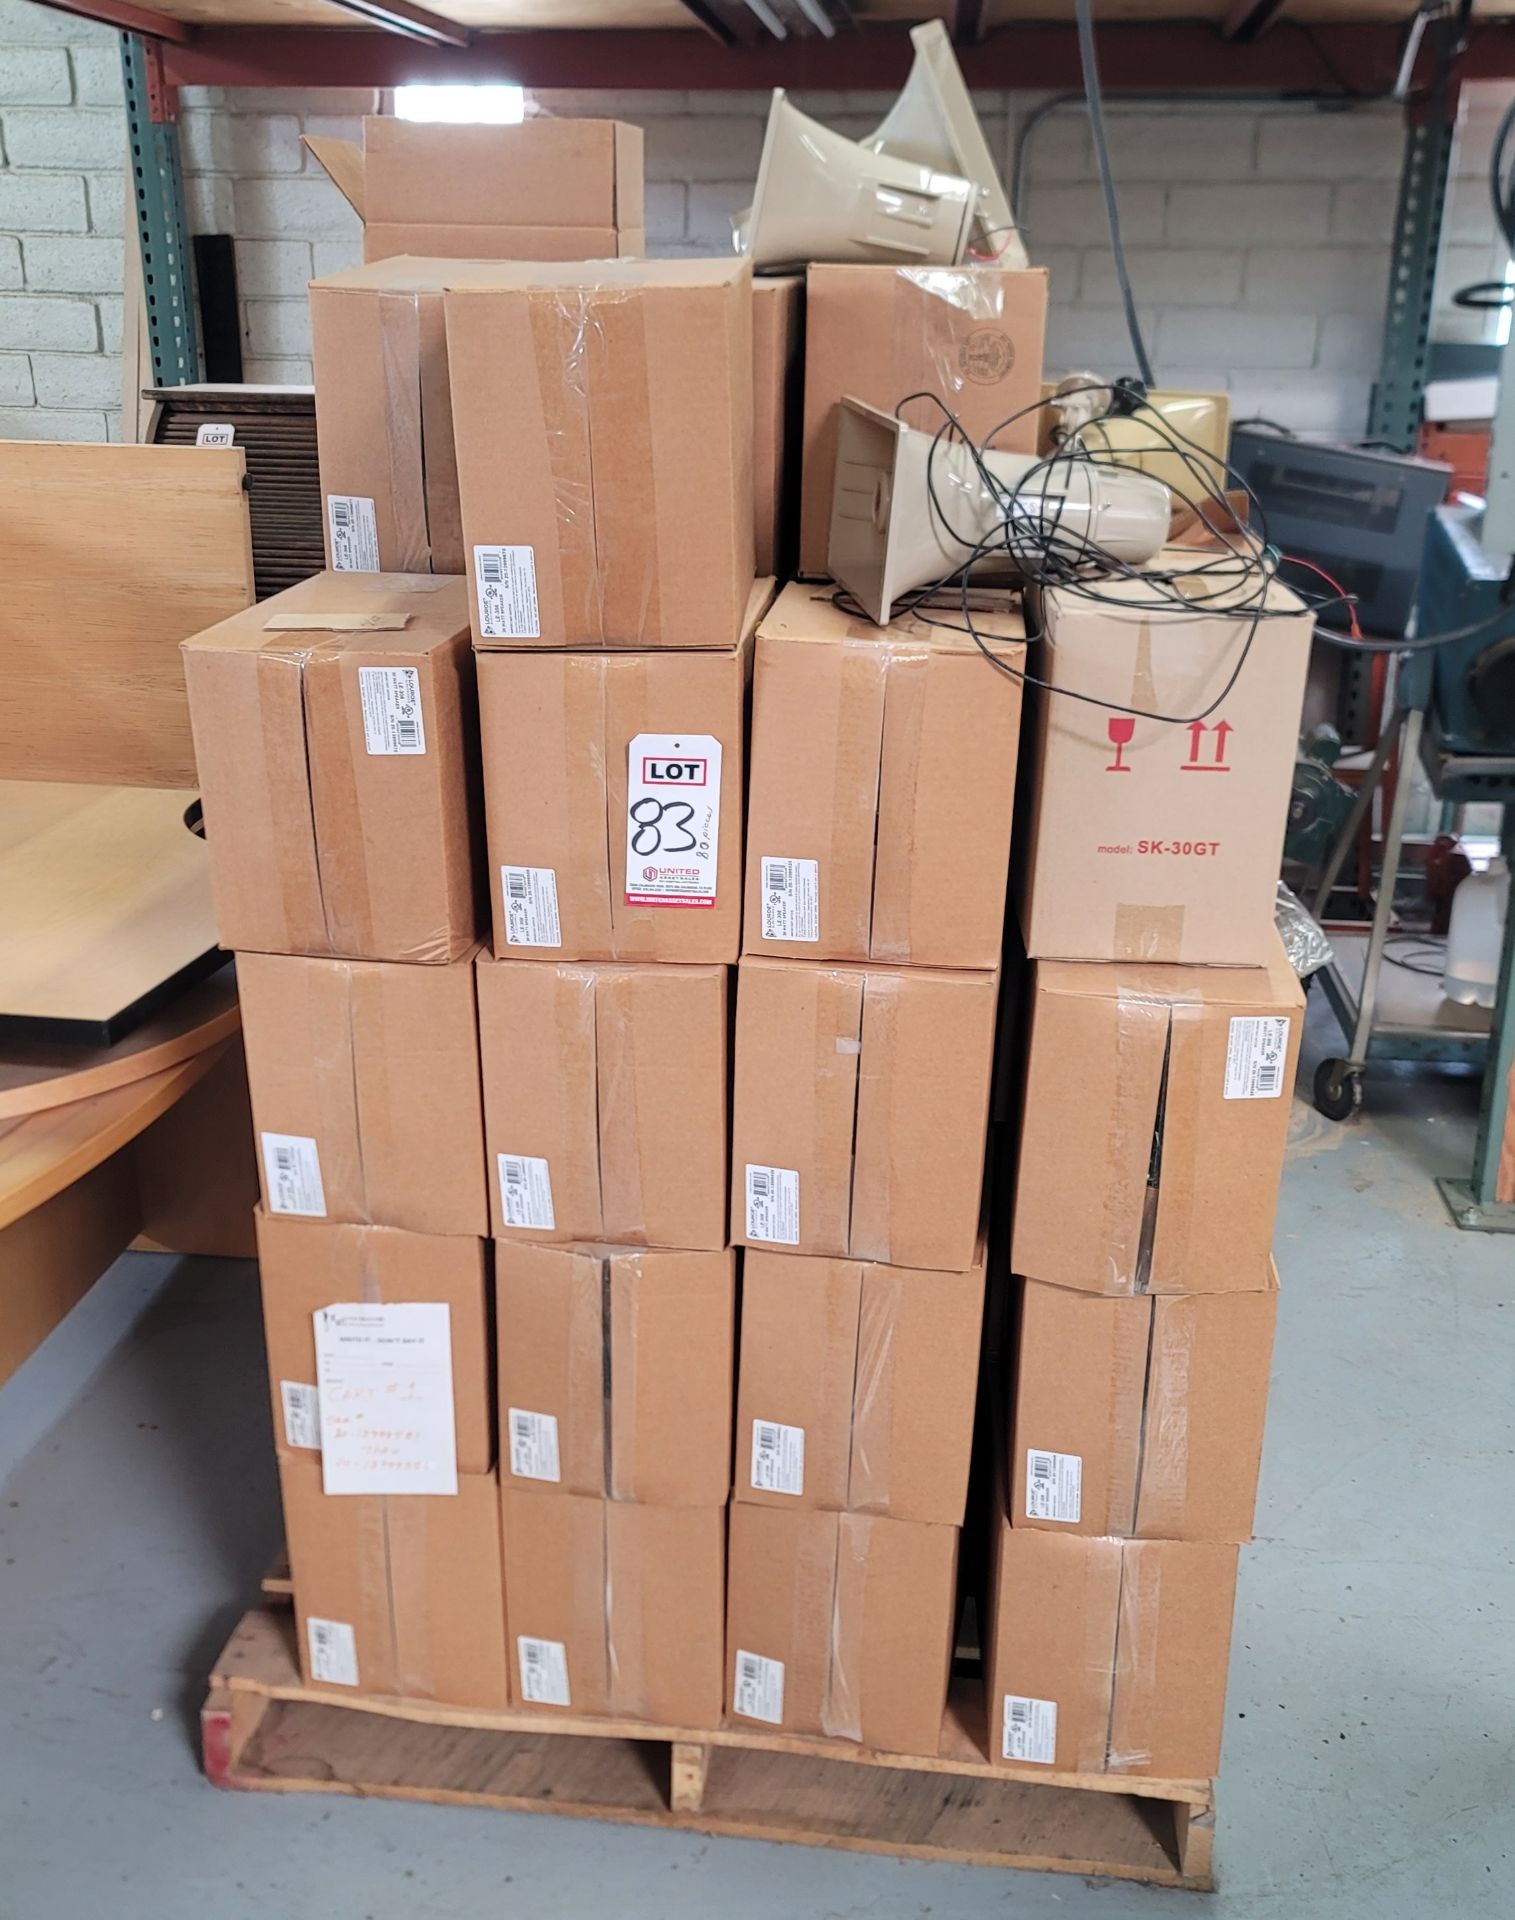 LOT - PALLET OF LOUROE LE-308 30-WATT SPEAKERS, NOTE: THESE ALL HAVE UNKNOWN DEFECTS & DID NOT